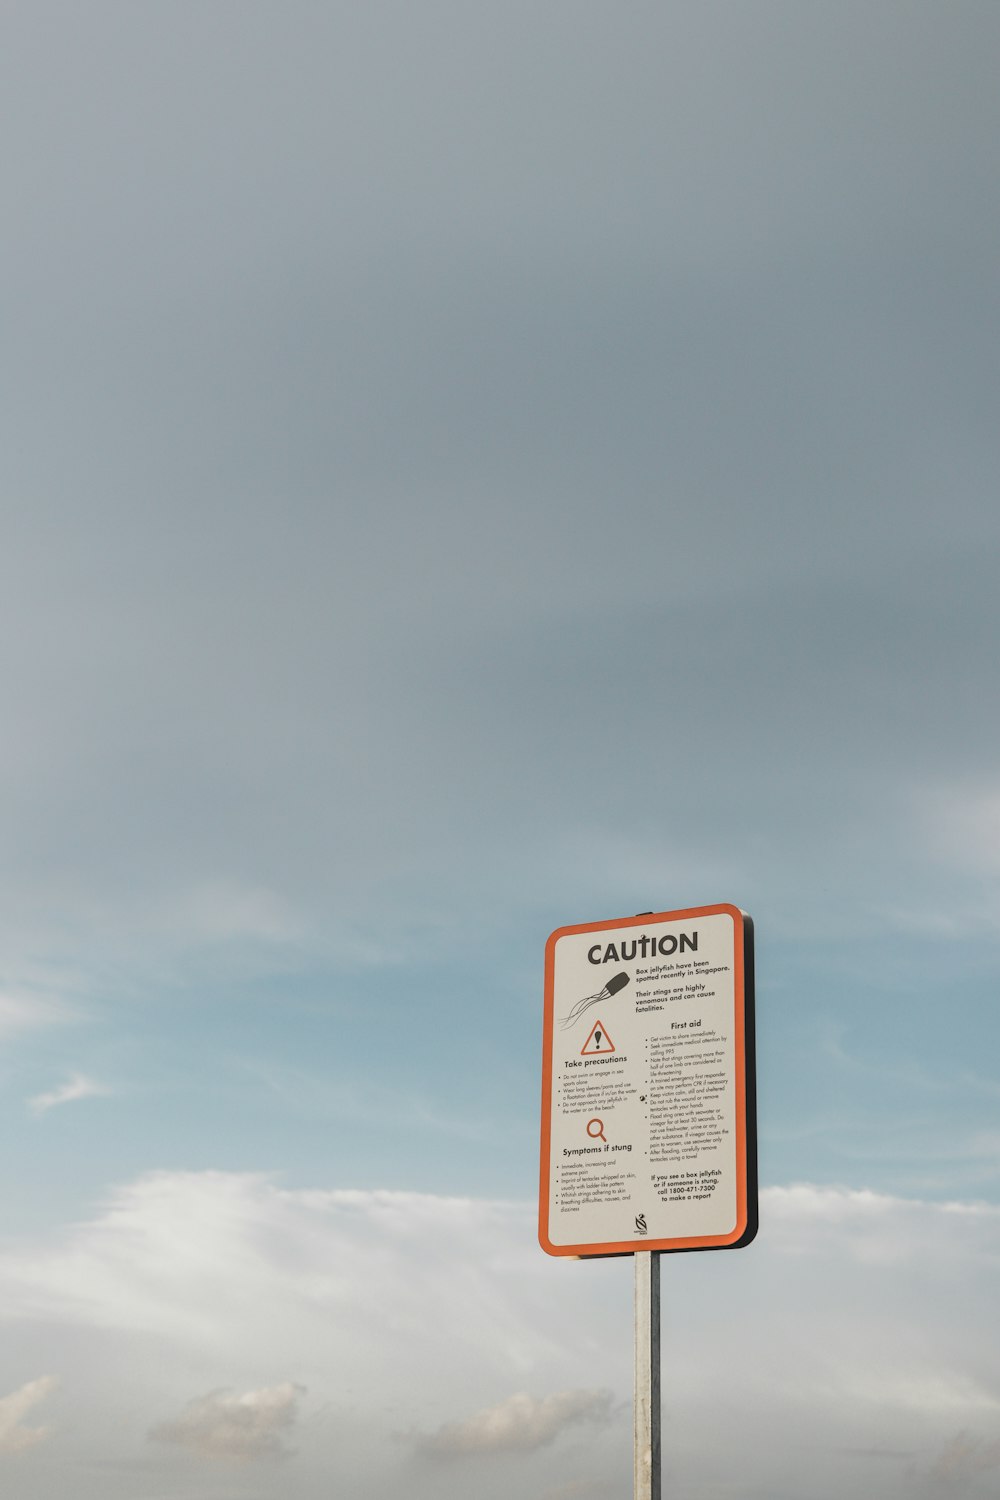 a sign on a pole in front of a cloudy sky